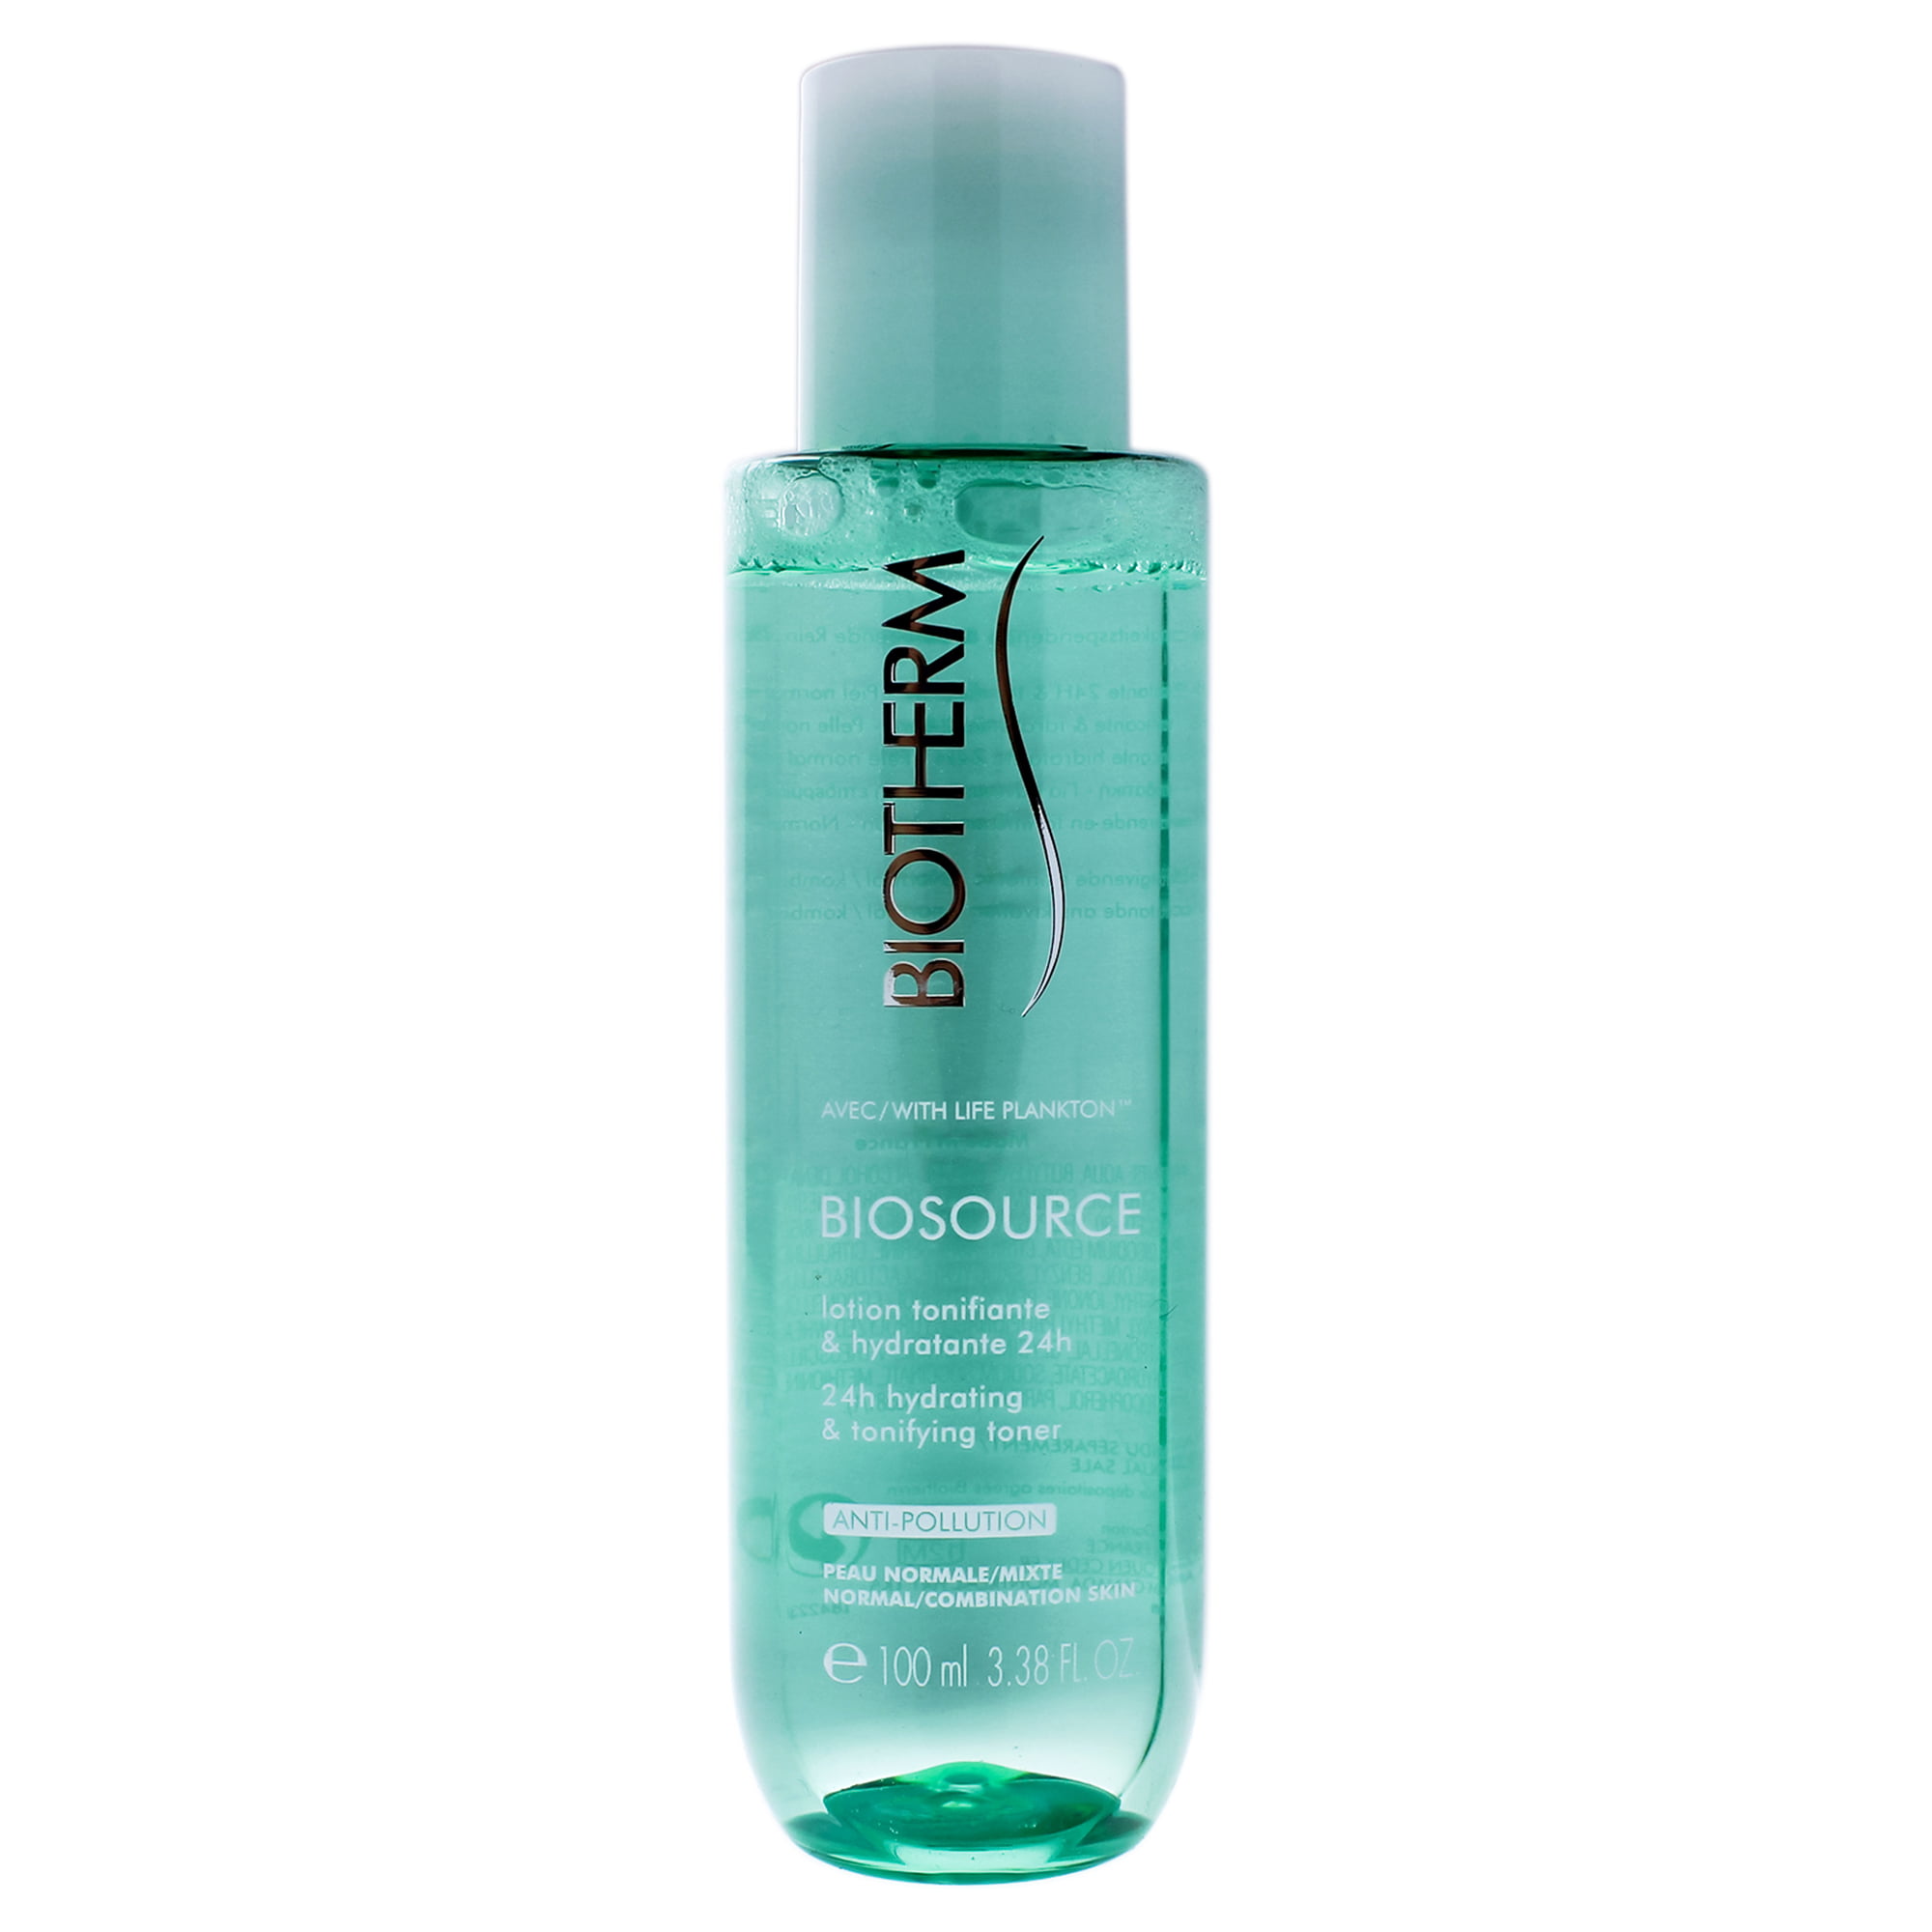 Biosource 24H Hydrating and Tonifying Toner by Biotherm for - oz - Walmart.com